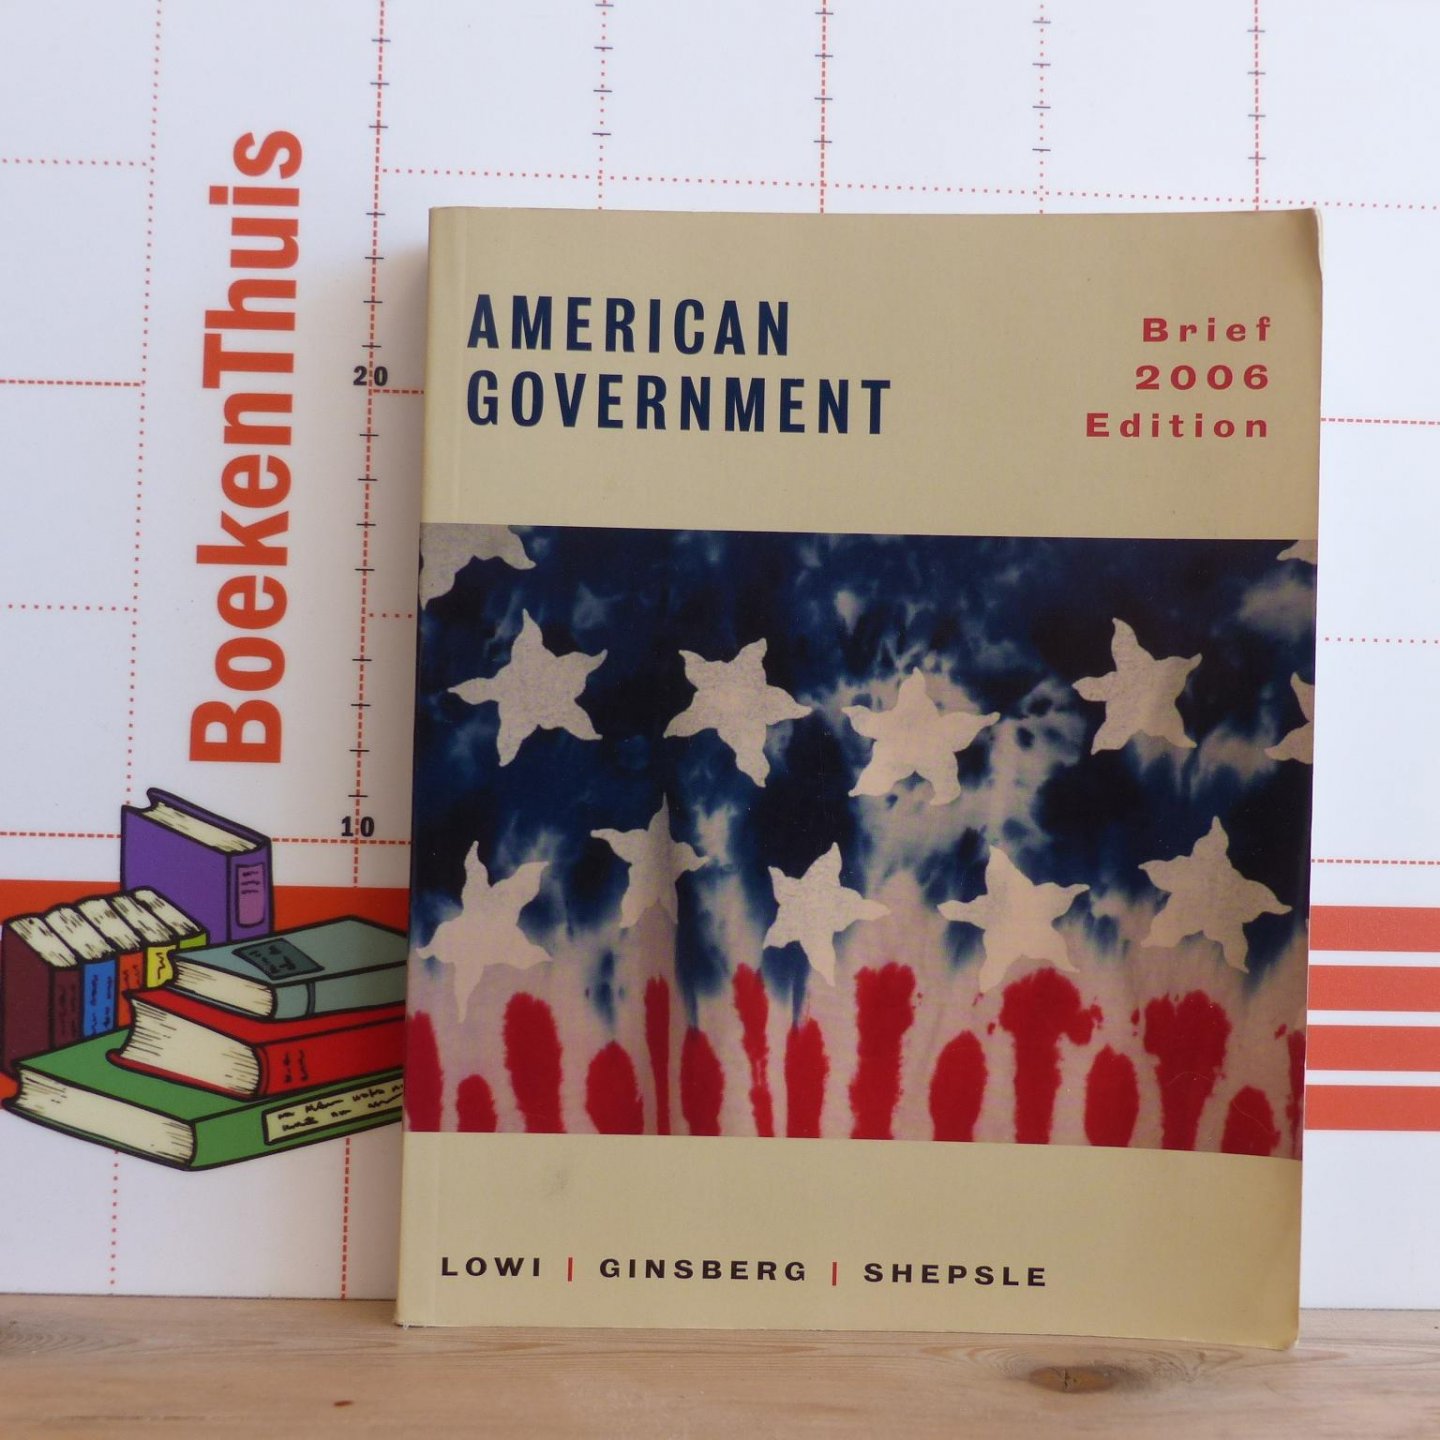 Lowi, Theodore J. - Ginsberg, Benjamin - Shepsle, Kenneth A. - American Government - freedom and power - brief 2006 edition